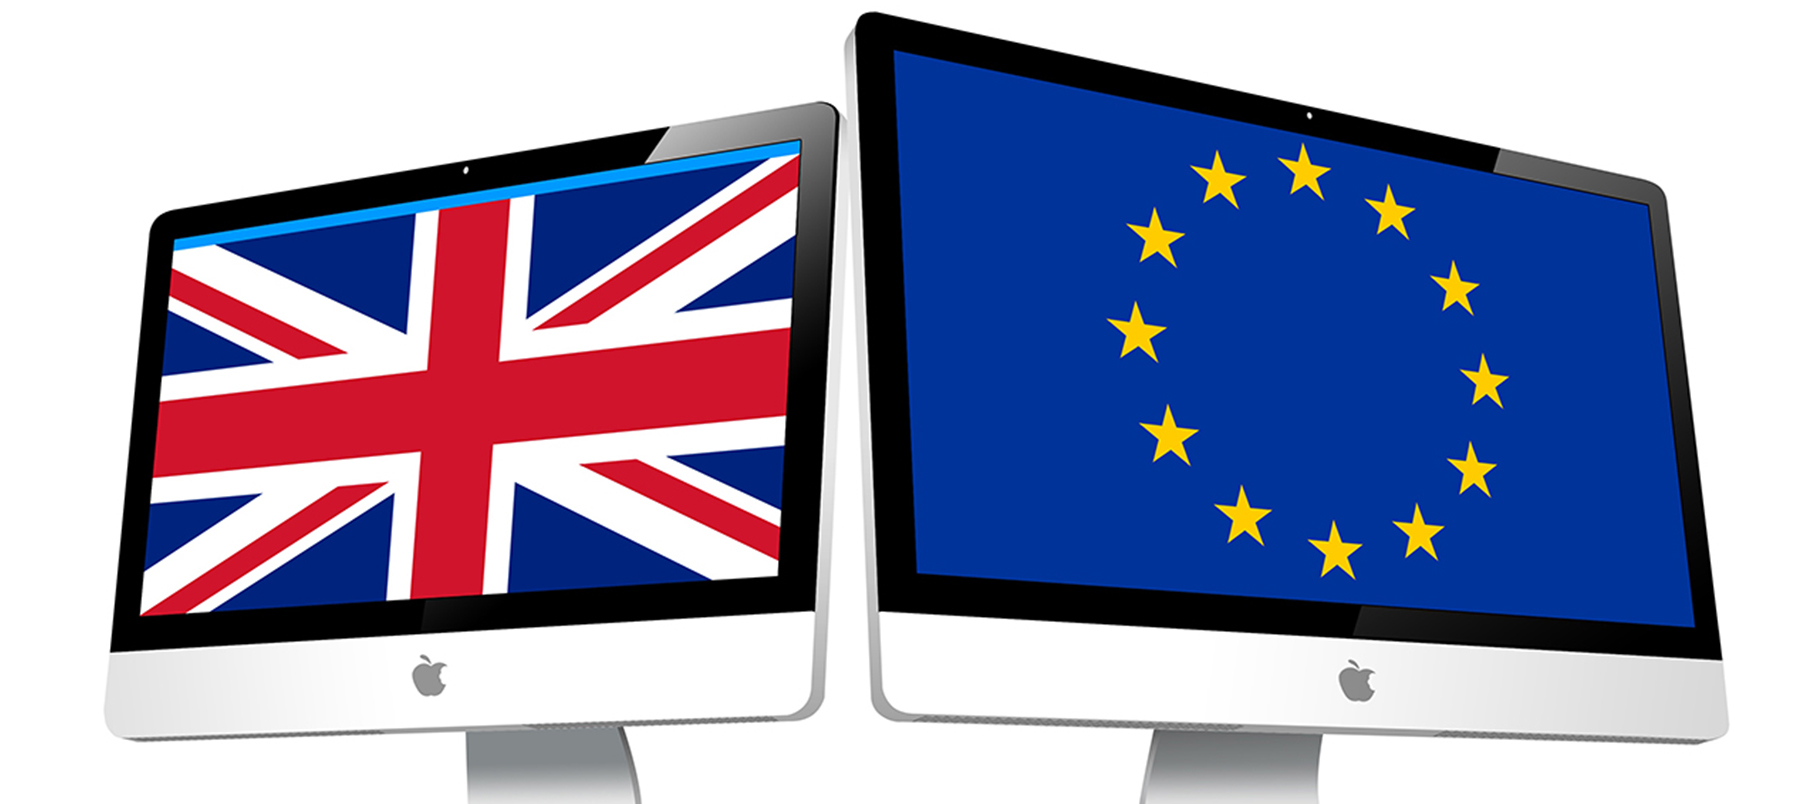 Two computers with union jack and EU flags as screen savers